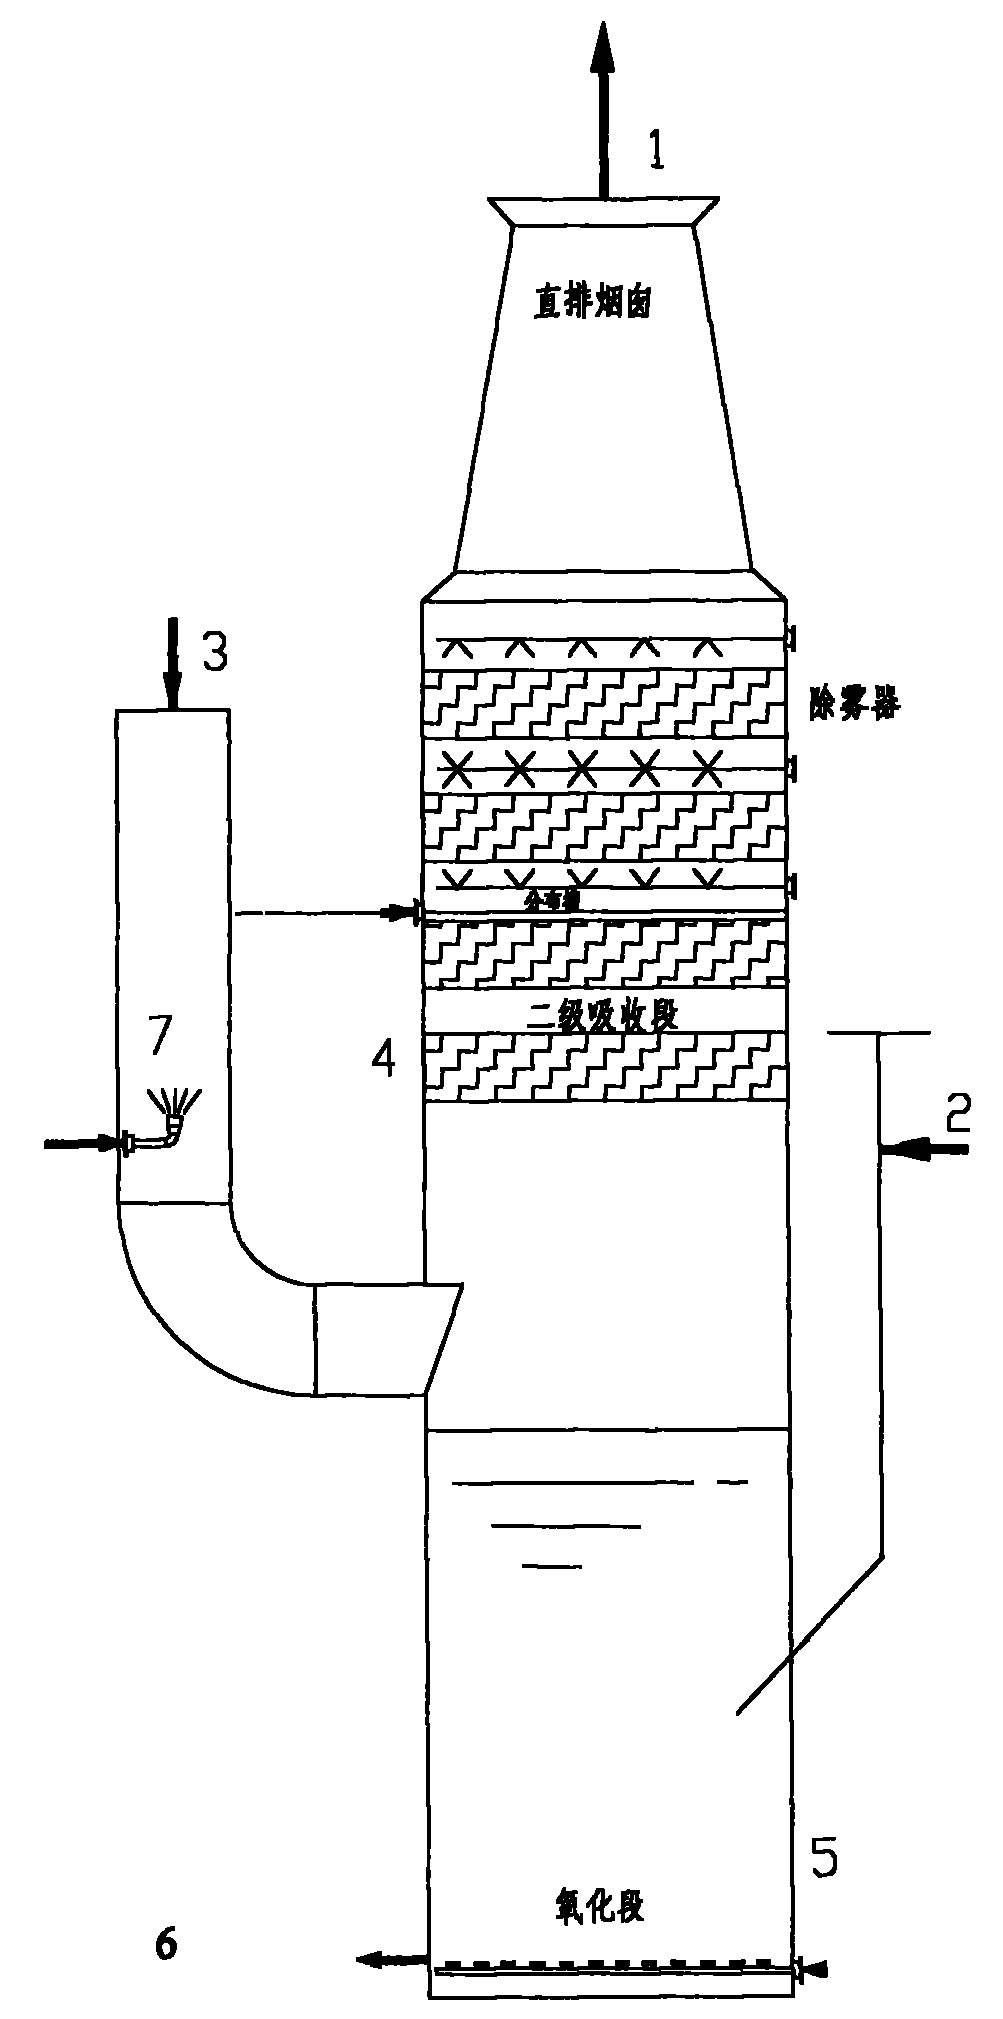 Method and device for performing flue gas desulfurization by using ammonia process